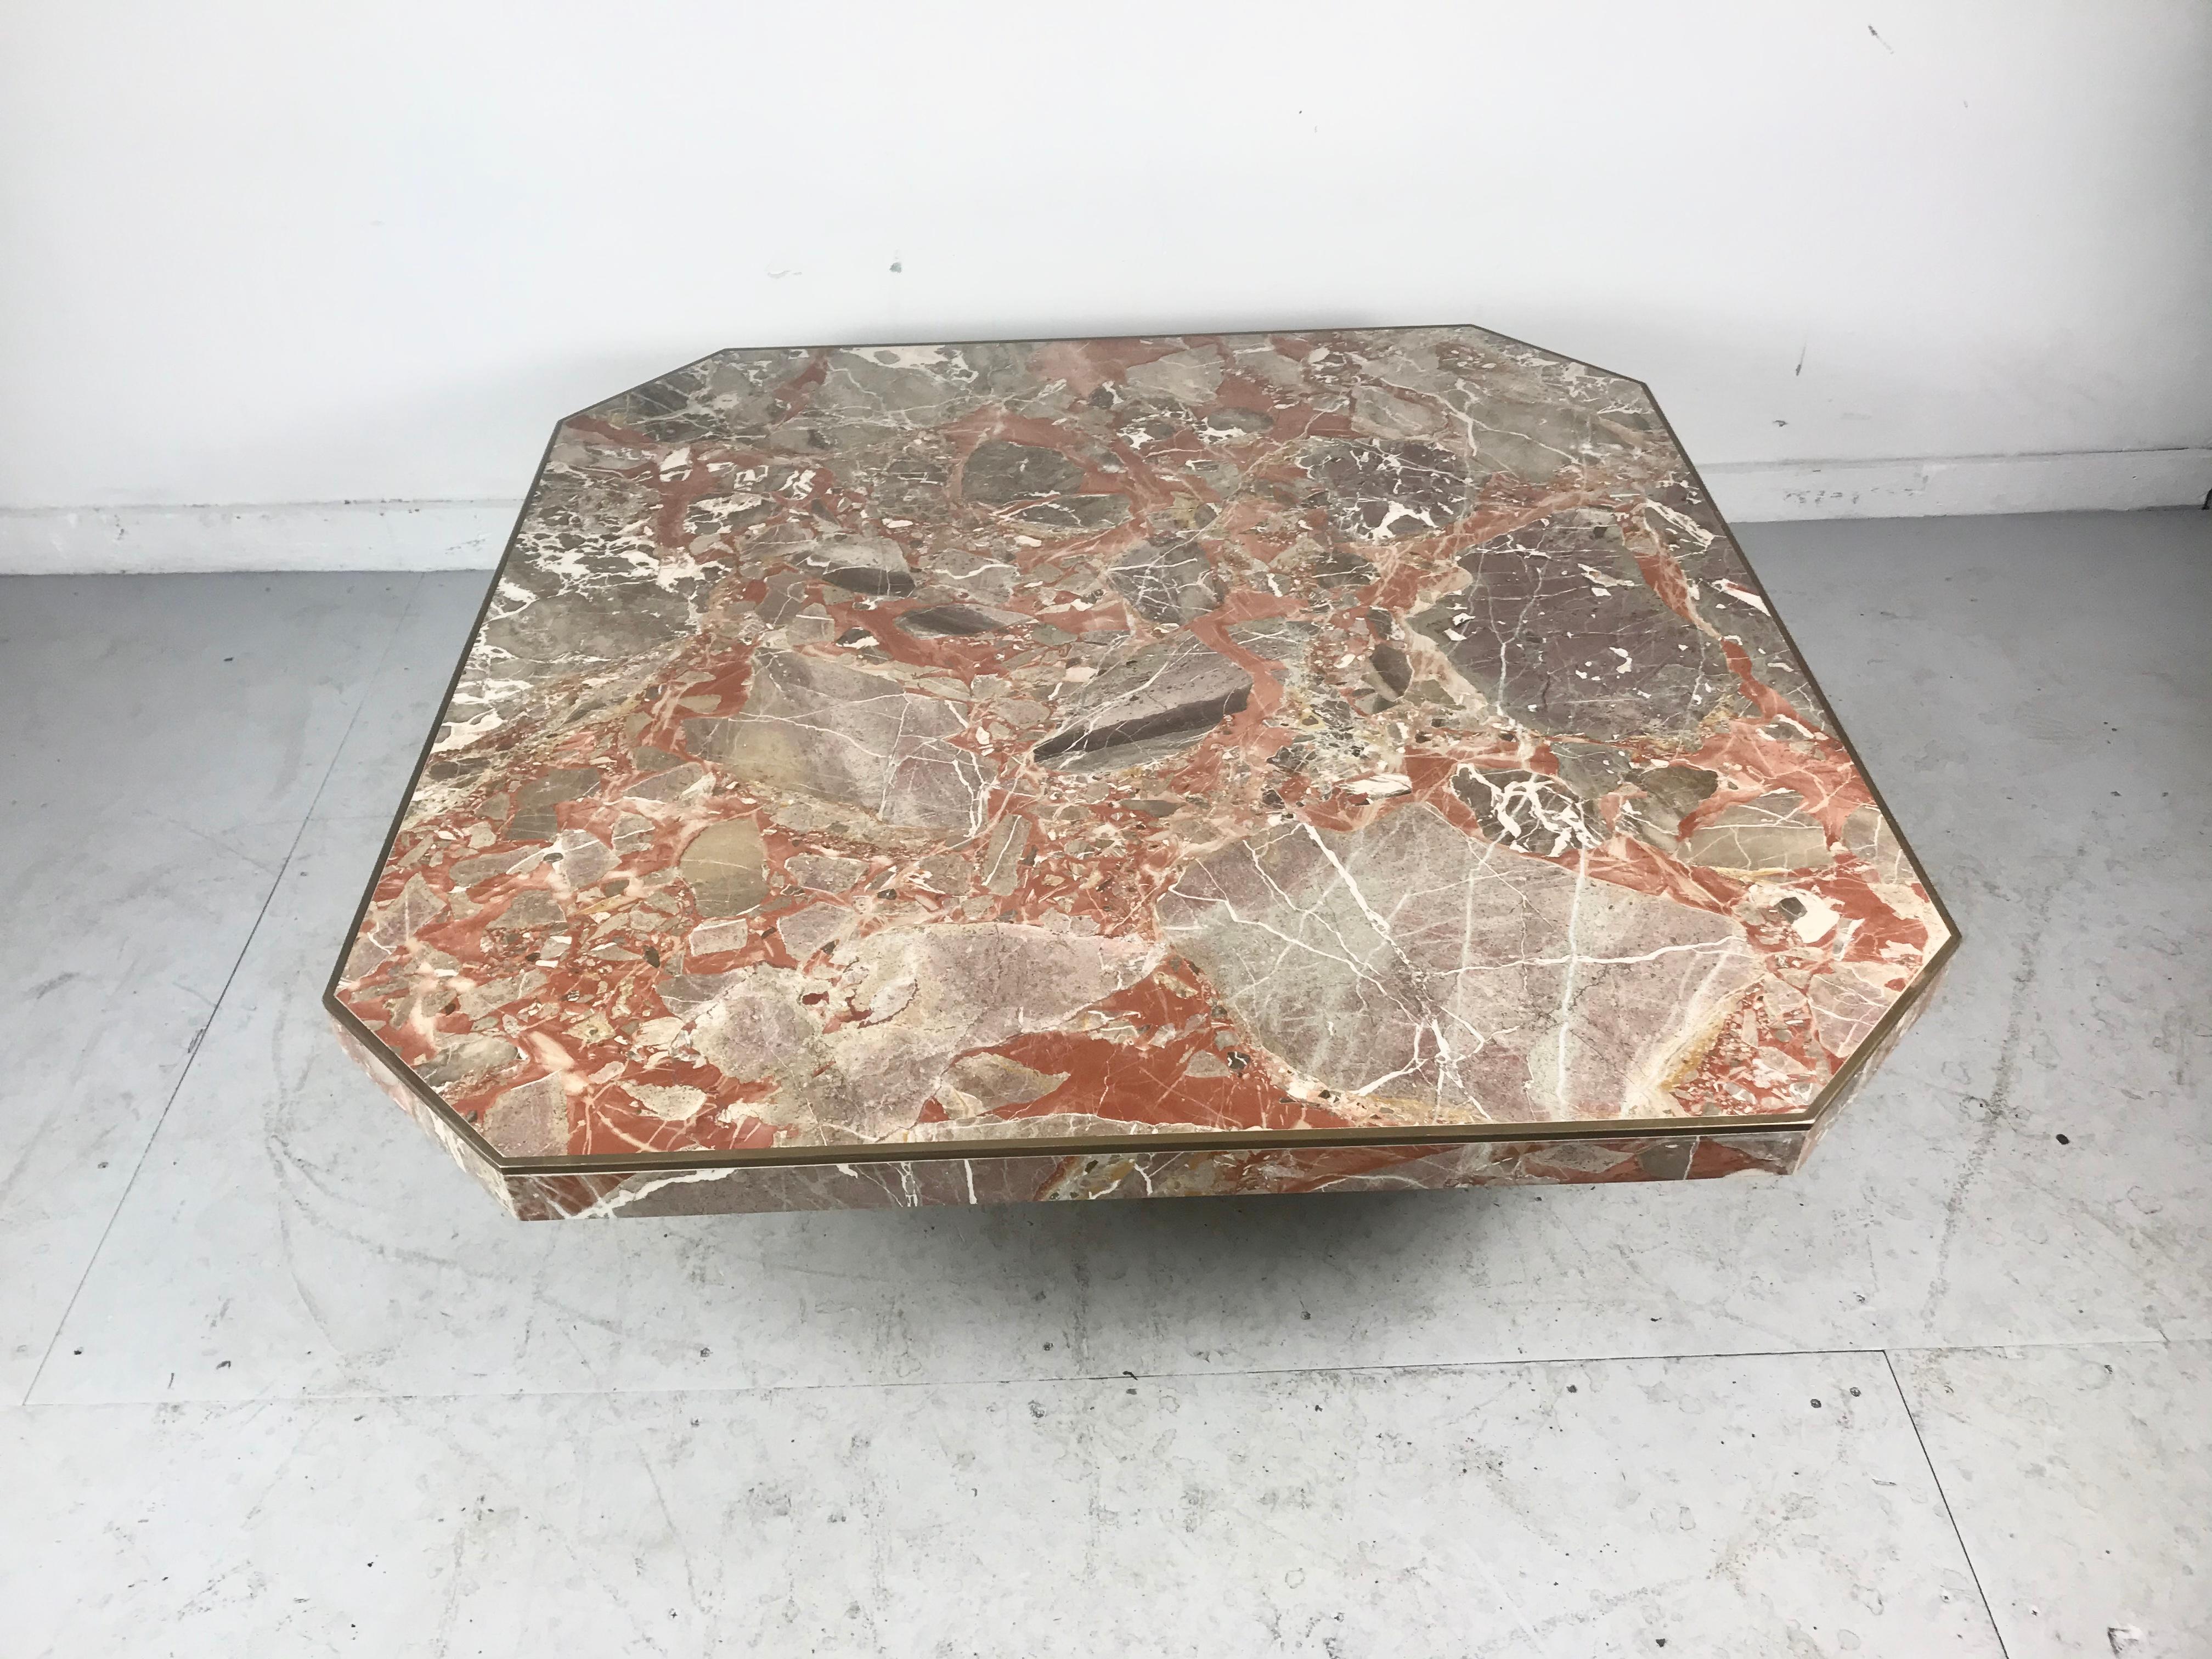 Large coffee / cocktail table with solid slab marble top, brass edges and marble pedestal base by Willy Rizzo, Italian, 1970s. Stunning multi-color Italian marble, hand delivery avail to New York City or anywhere en route from Buffalo NY.